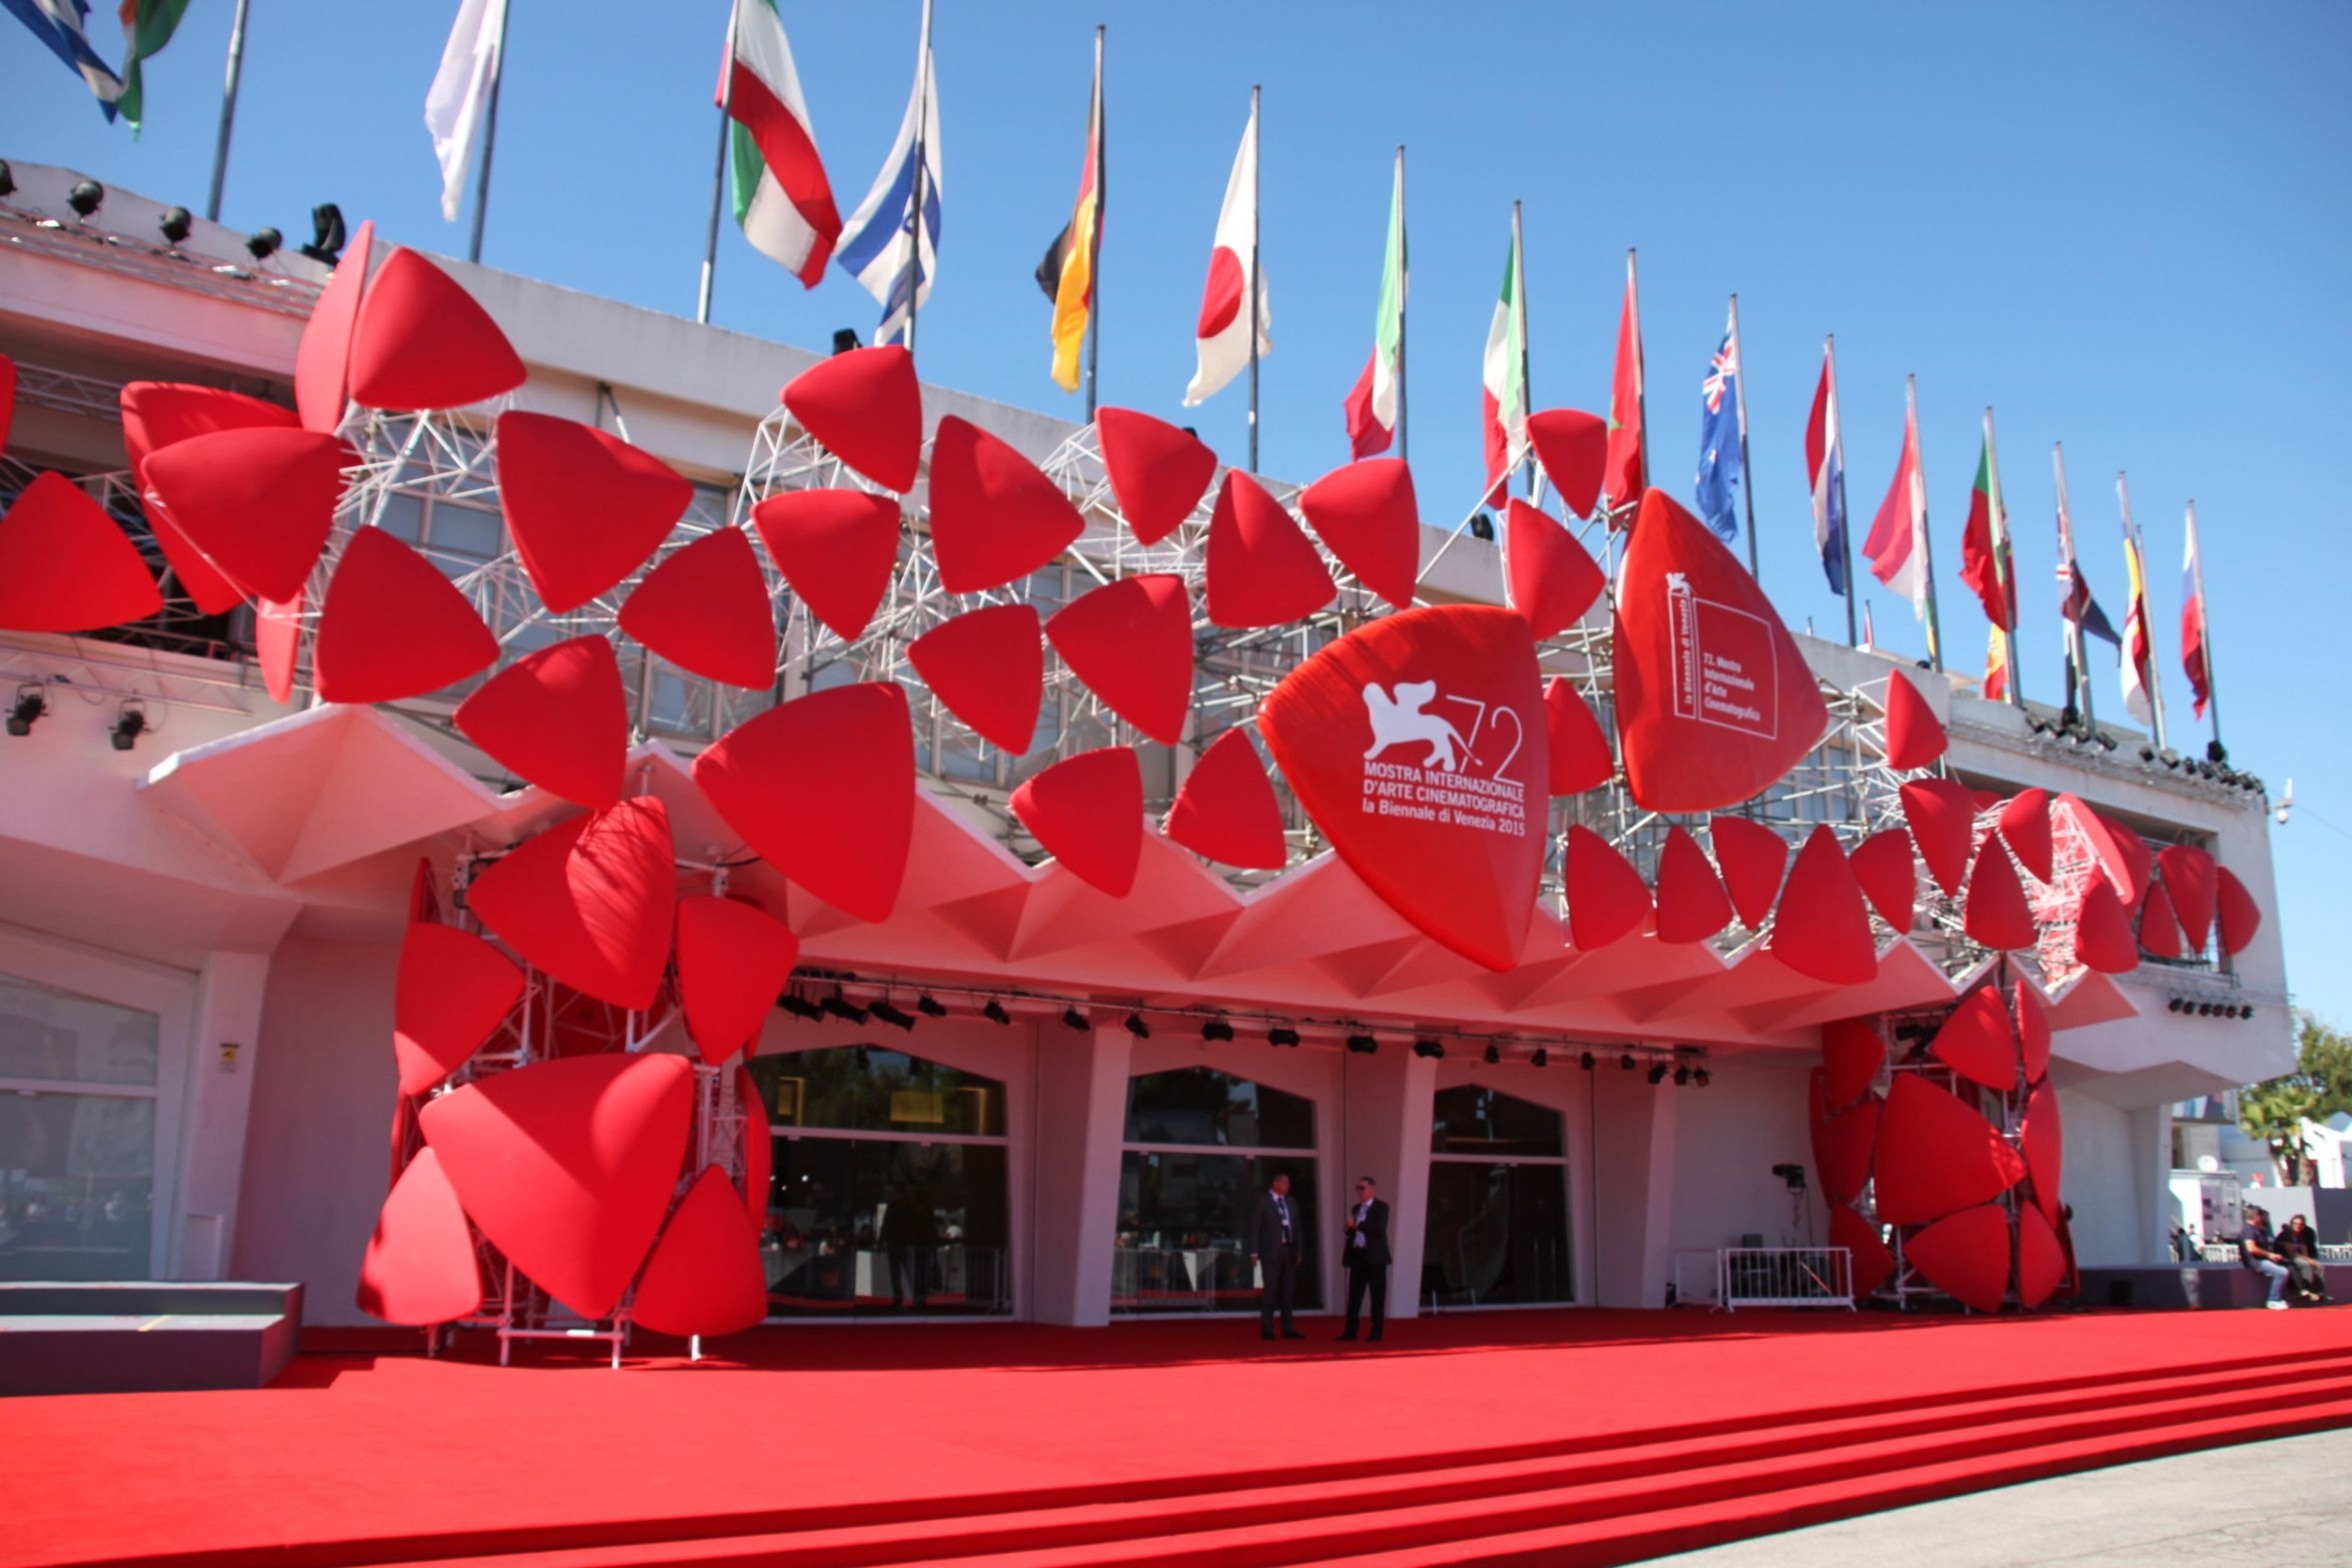 <p>Speaking of the Lido, when the Venice Film Festival hits town every September, there's no better place to be. Pro tip: get to screenings early. Even if you have a pass, you'll need to be there a couple of hours before the film starts. </p><p>You may also like: <a href='https://www.yardbarker.com/lifestyle/articles/20_ways_to_make_your_sleep_better_010124/s1__37417223'>20 ways to make your sleep better</a></p>